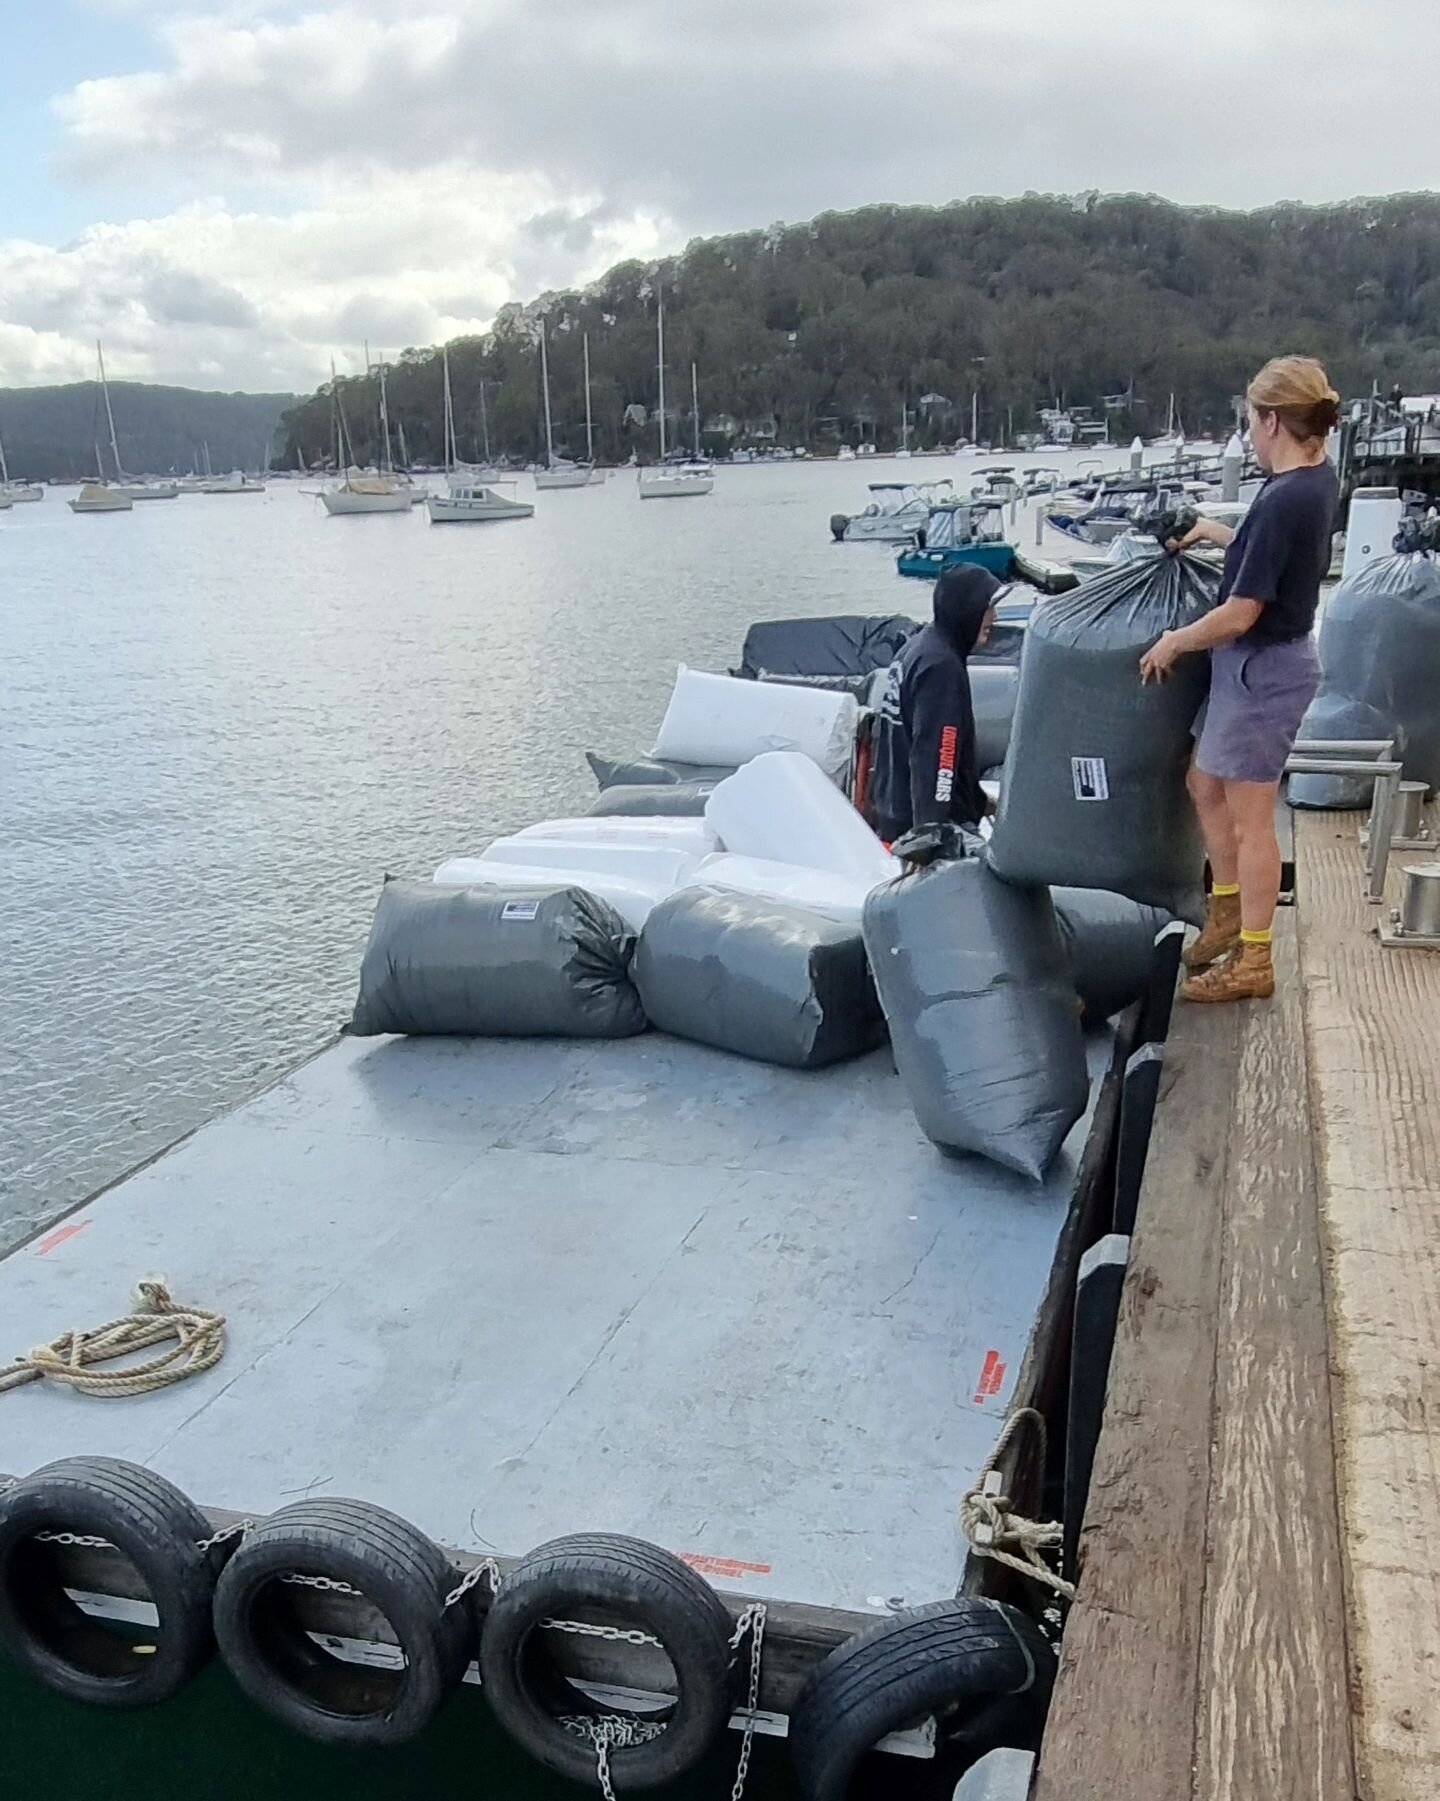 27 cubic meters of insulation batts delivered this morning! We chose Australian made polyester insulation batts from Polyester Solutions. The batts are made primarily from recycled PET bottles, and unlike fibreglass batts are non-irritant for the peo